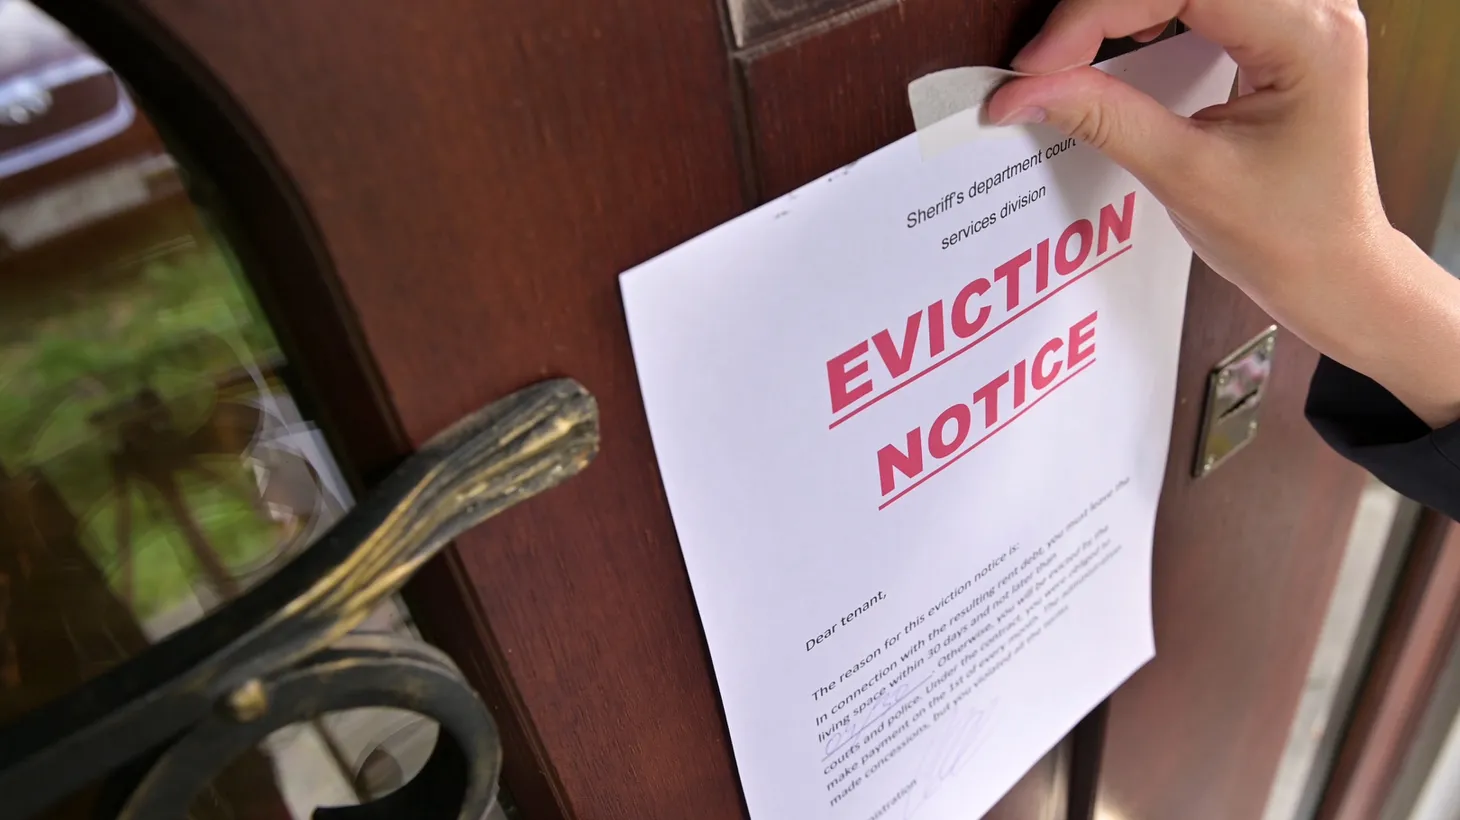 For years, LA housing advocates have been pushing for public officials to guarantee a right to counsel for those facing eviction.